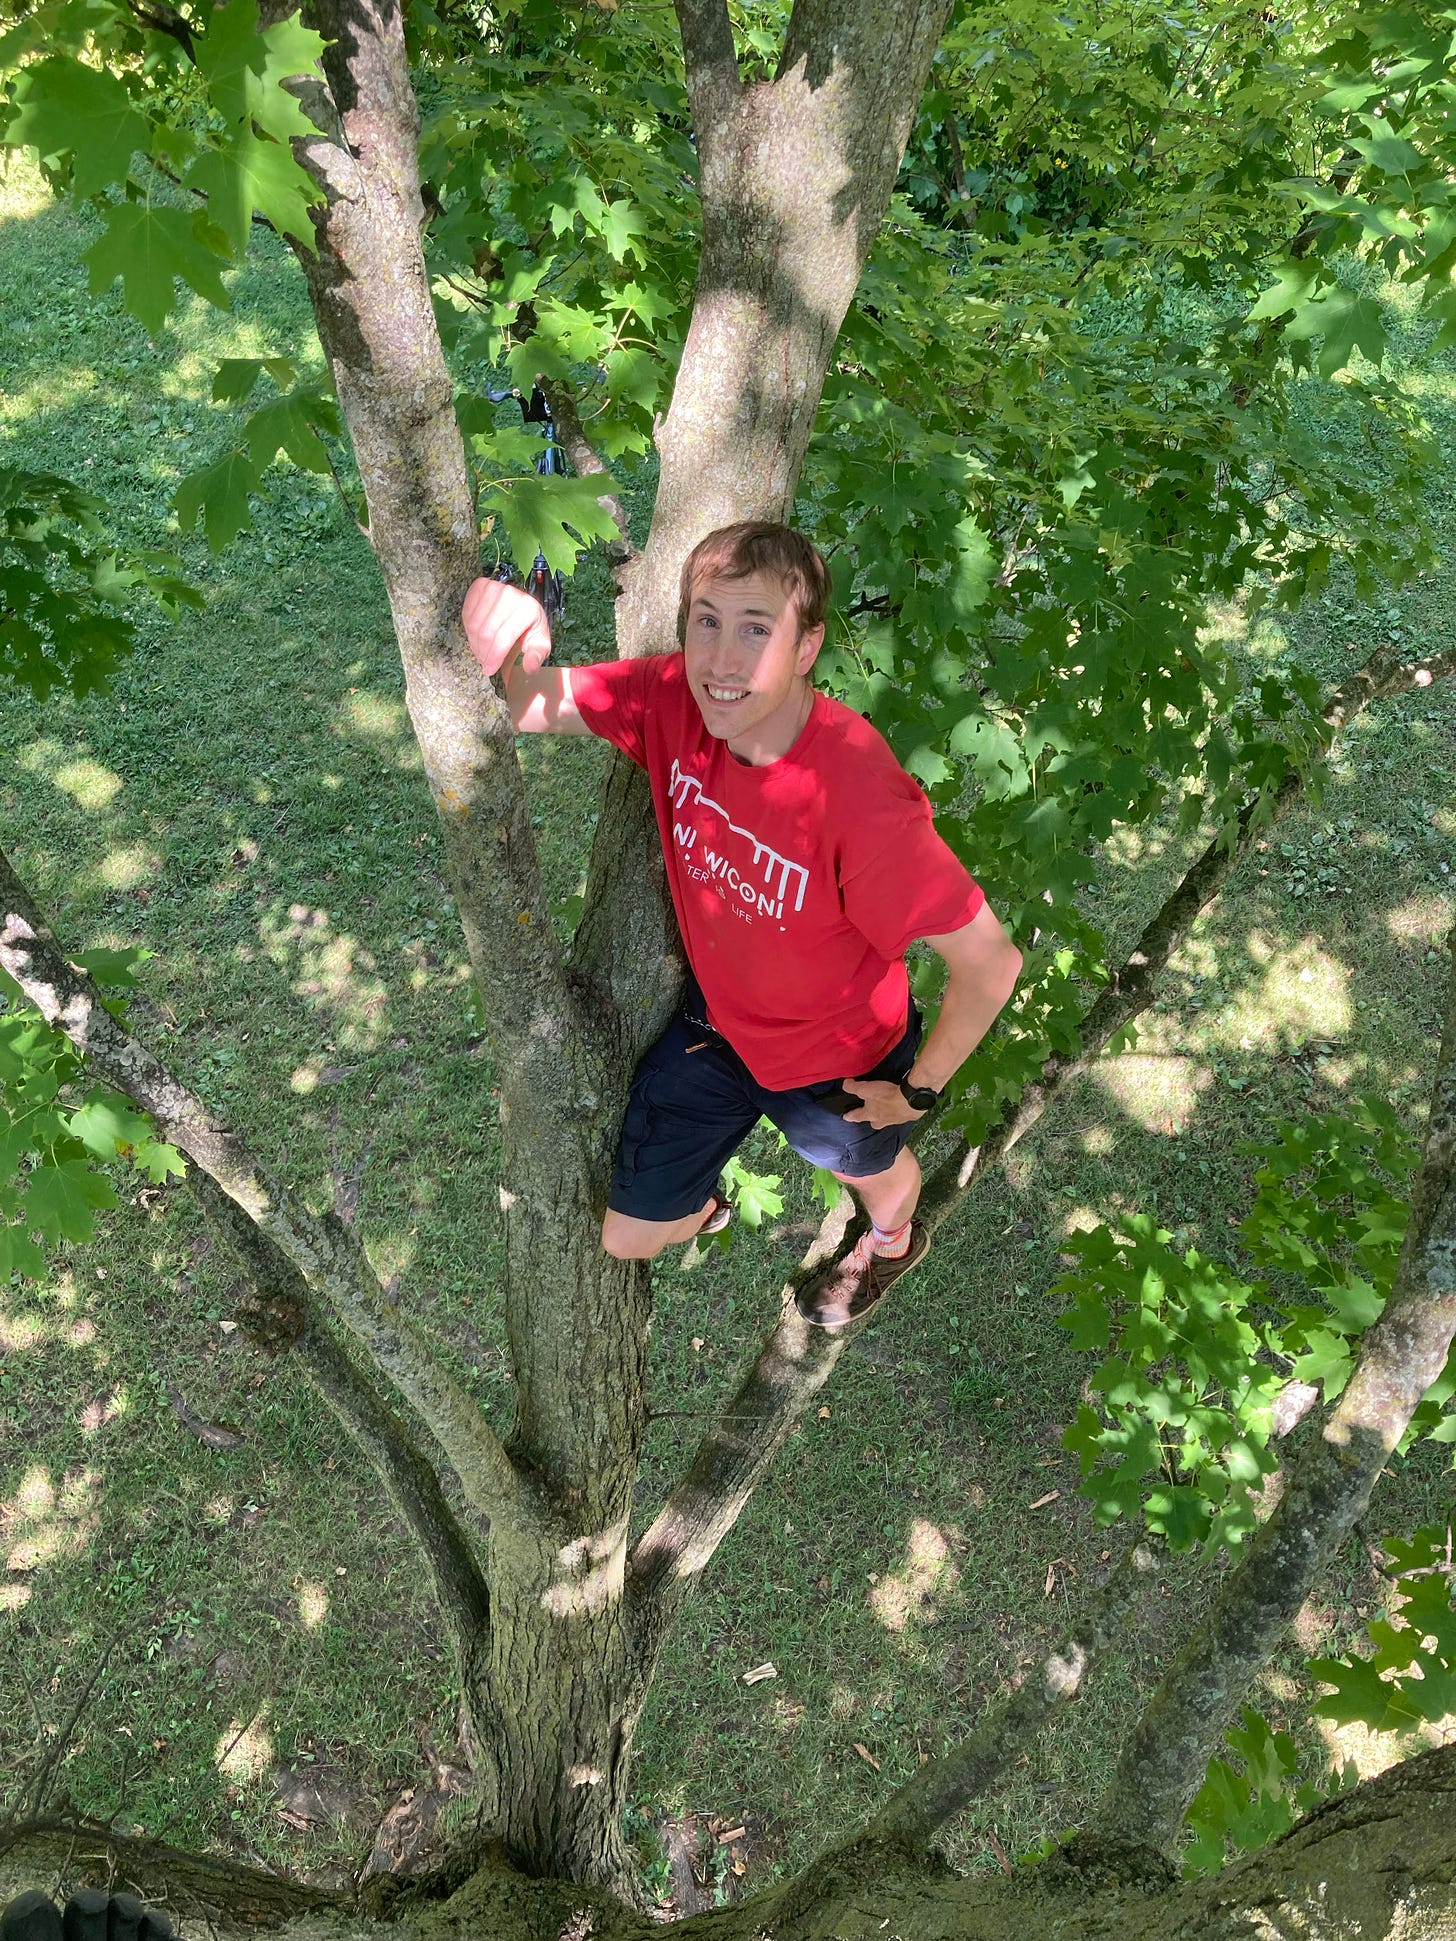 A photo of my friend Carl in a tree, leaning against some branches.